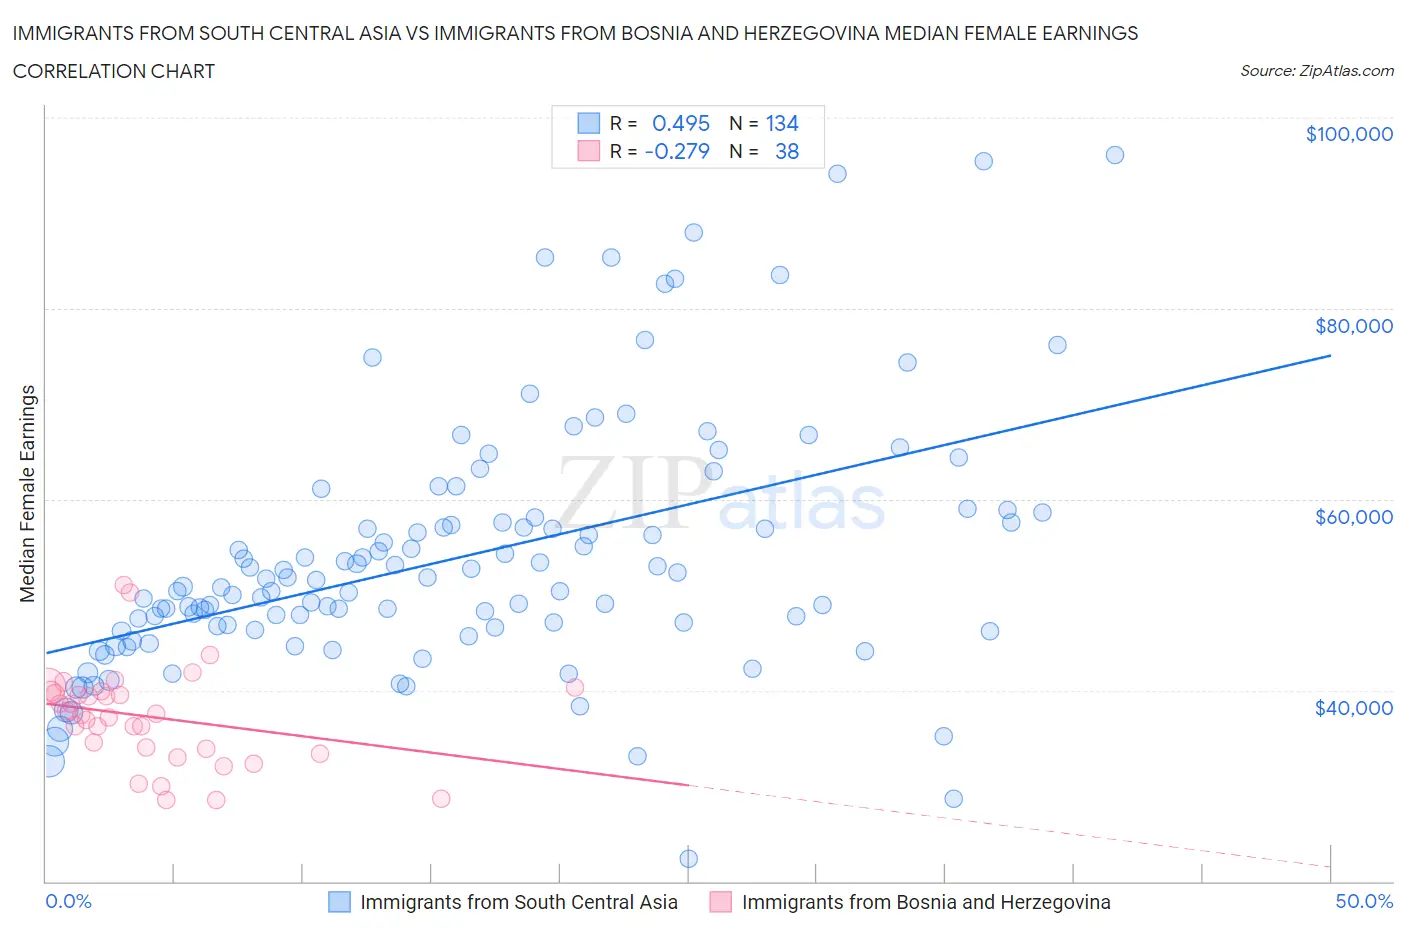 Immigrants from South Central Asia vs Immigrants from Bosnia and Herzegovina Median Female Earnings